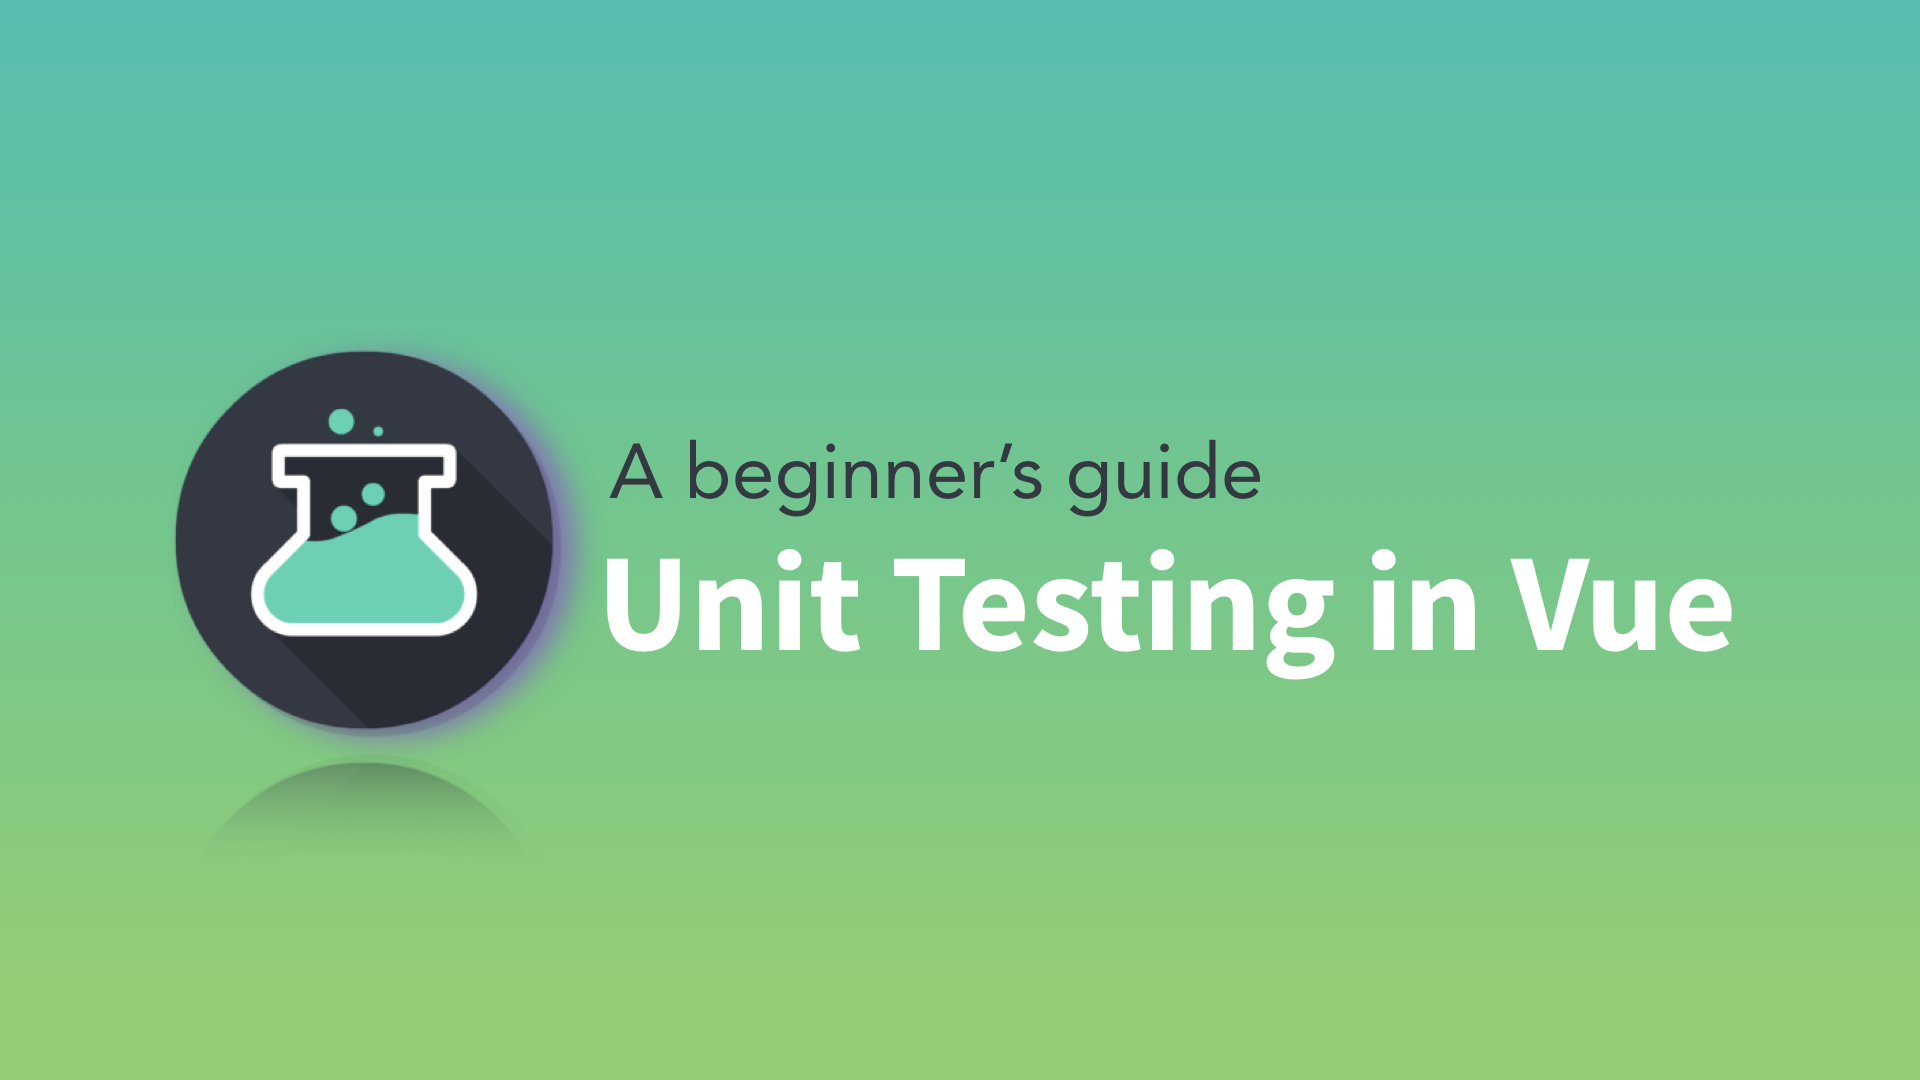 Unit Testing in Vue: What to Test?